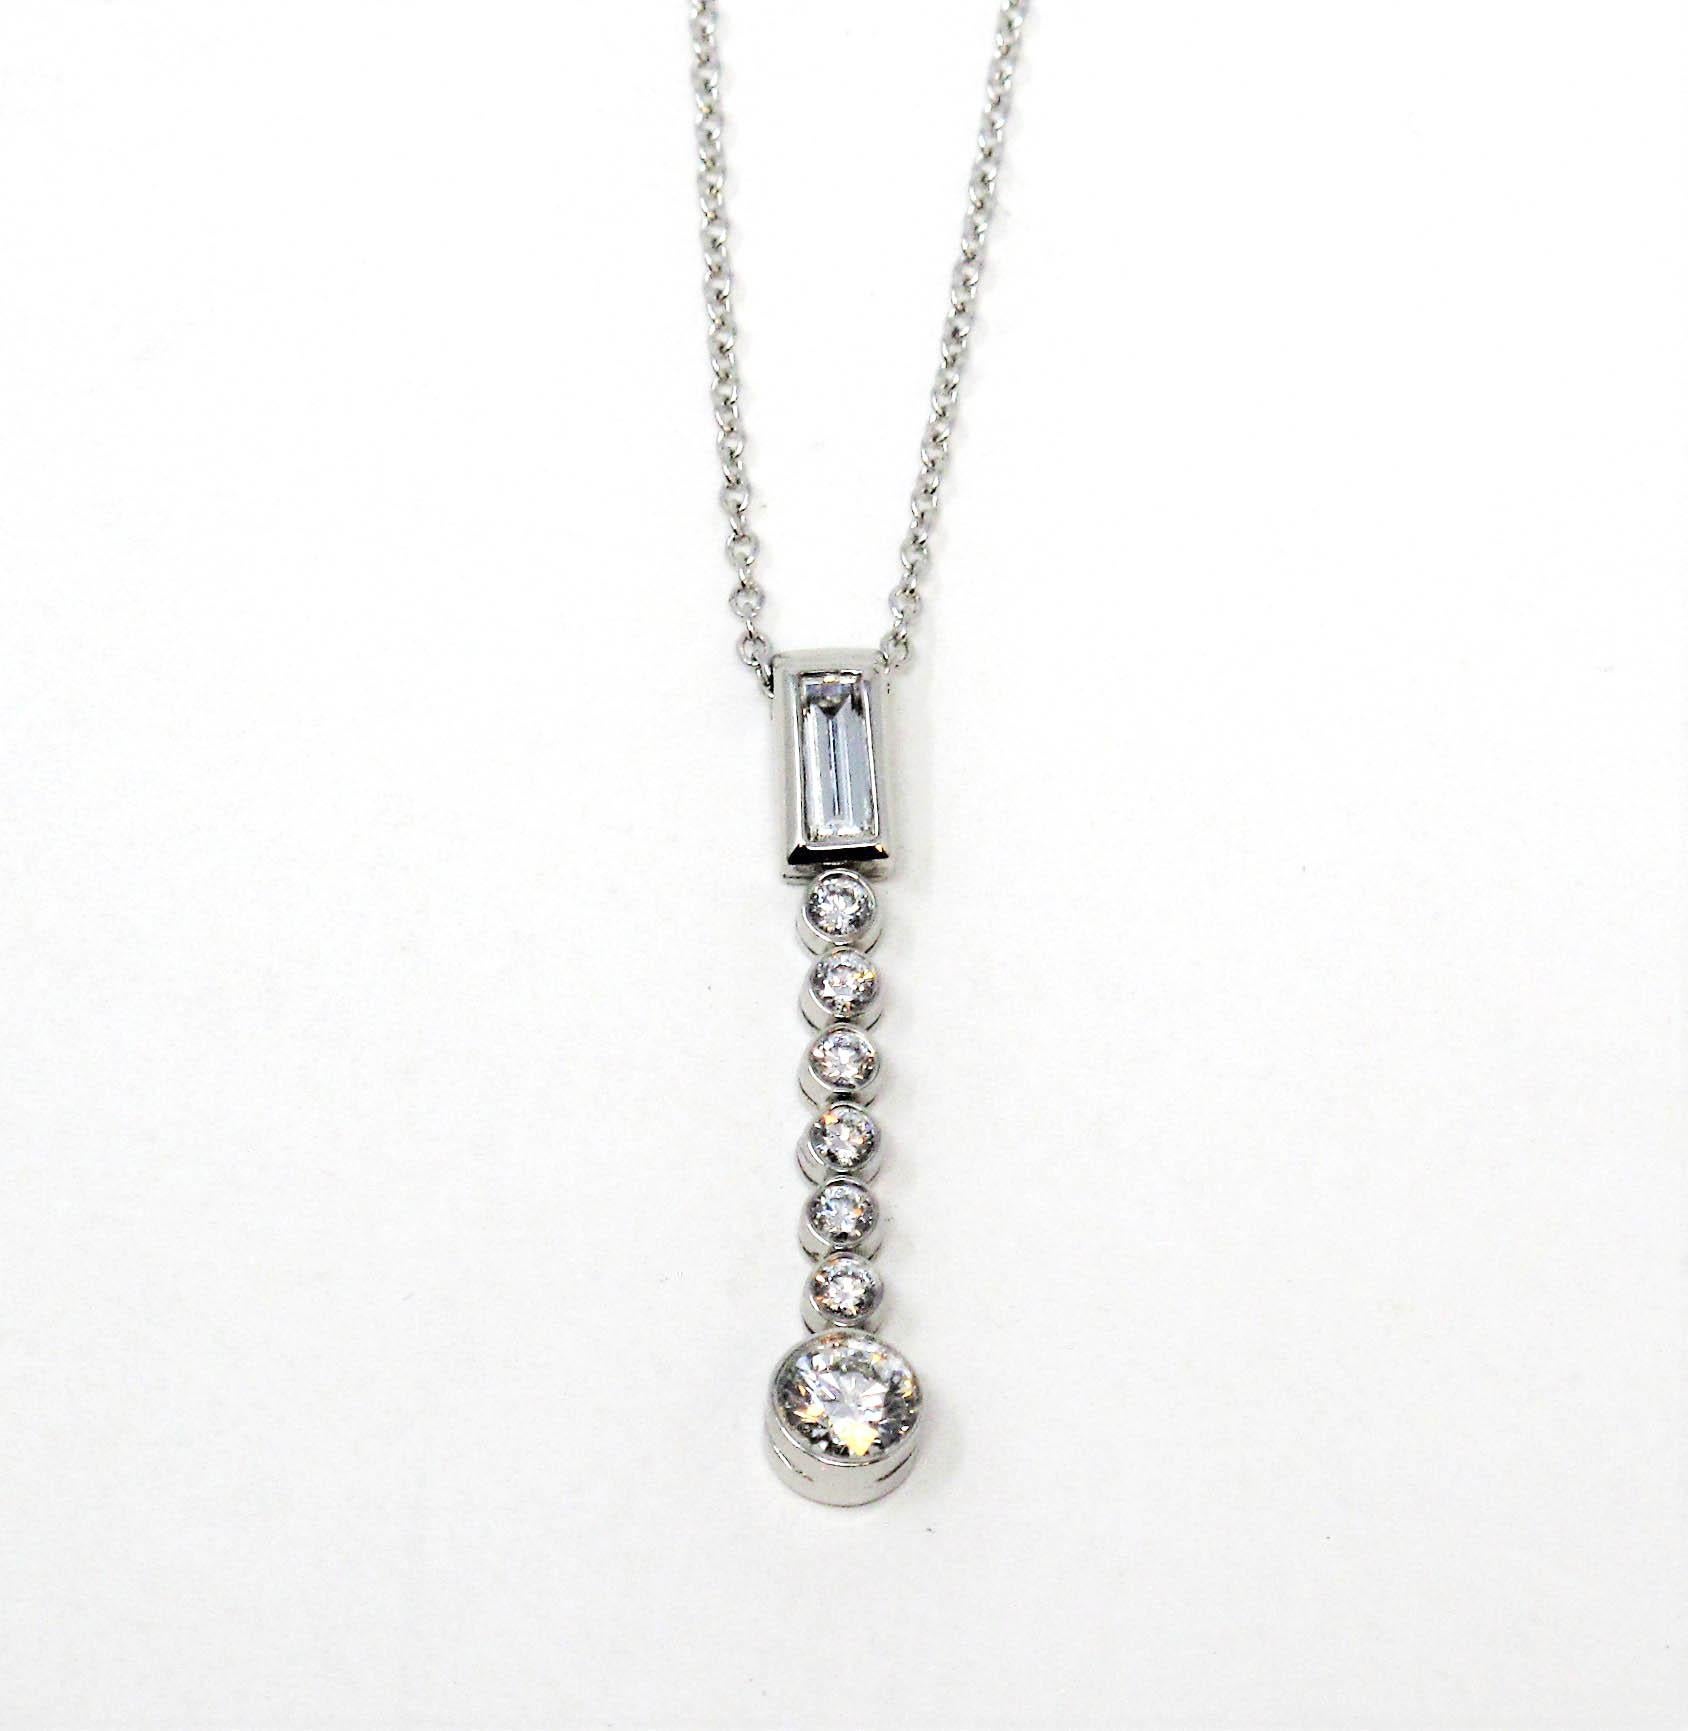 Tiffany & Co. Jazz Diamond Drop Pendant in Platinum Necklace, circa 2003 In Good Condition For Sale In Scottsdale, AZ